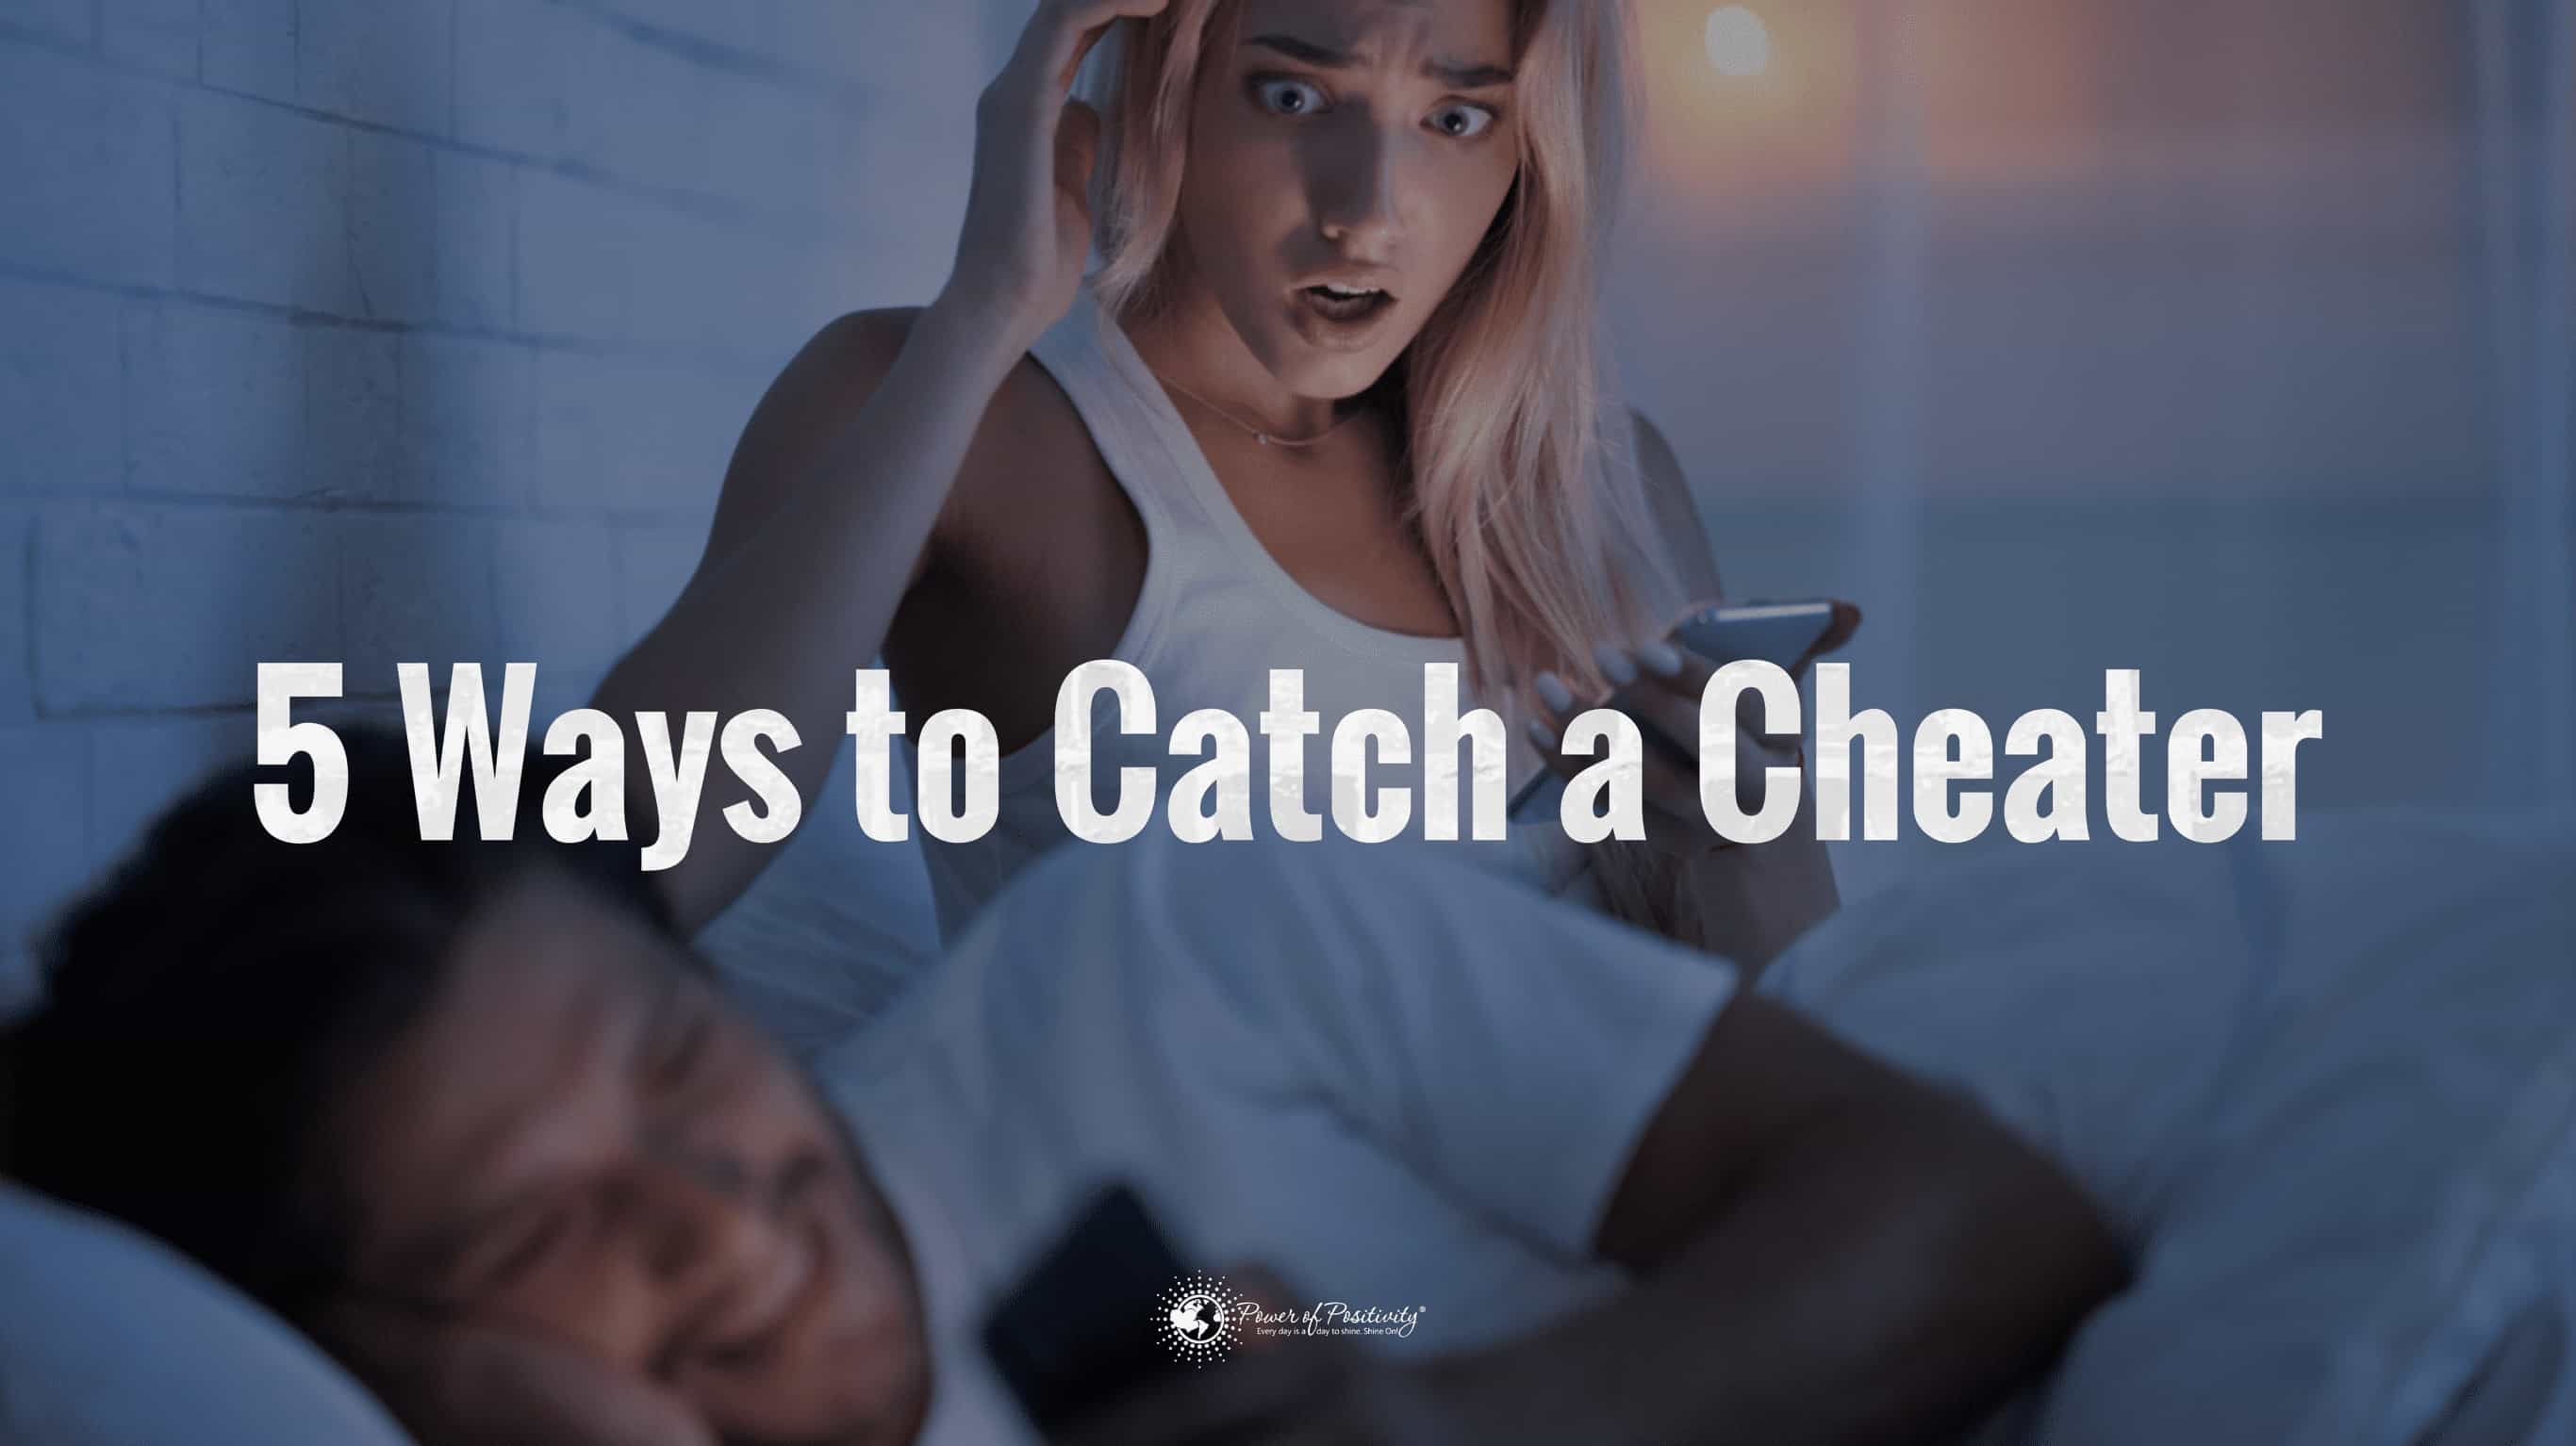 5 Ways to Catch a Cheater